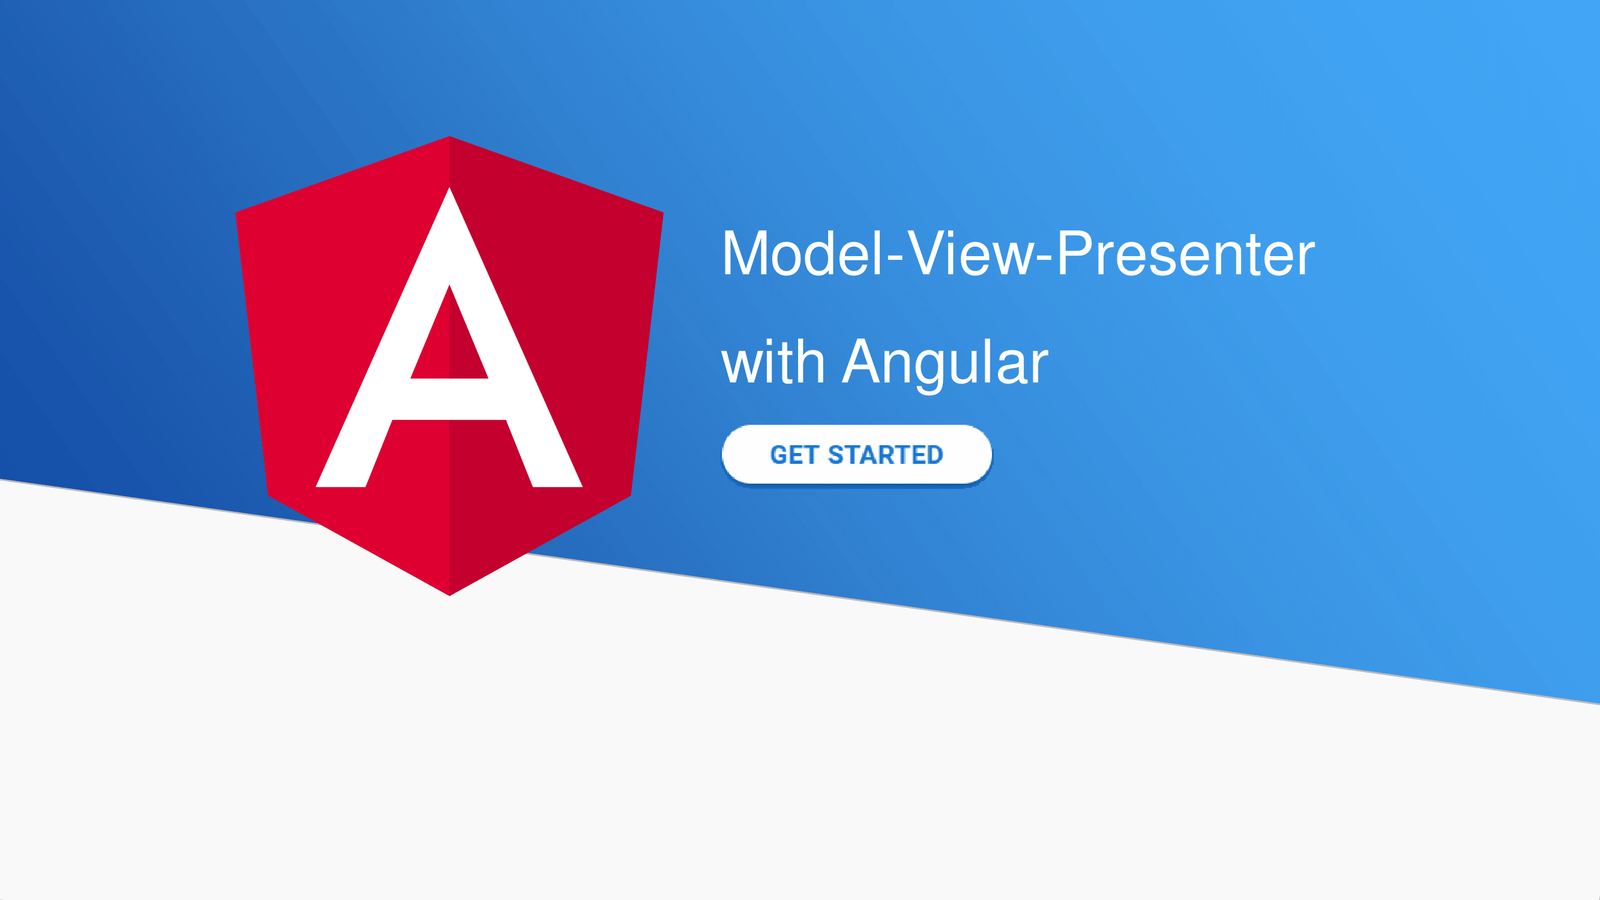 Model-View-Presenter with Angular